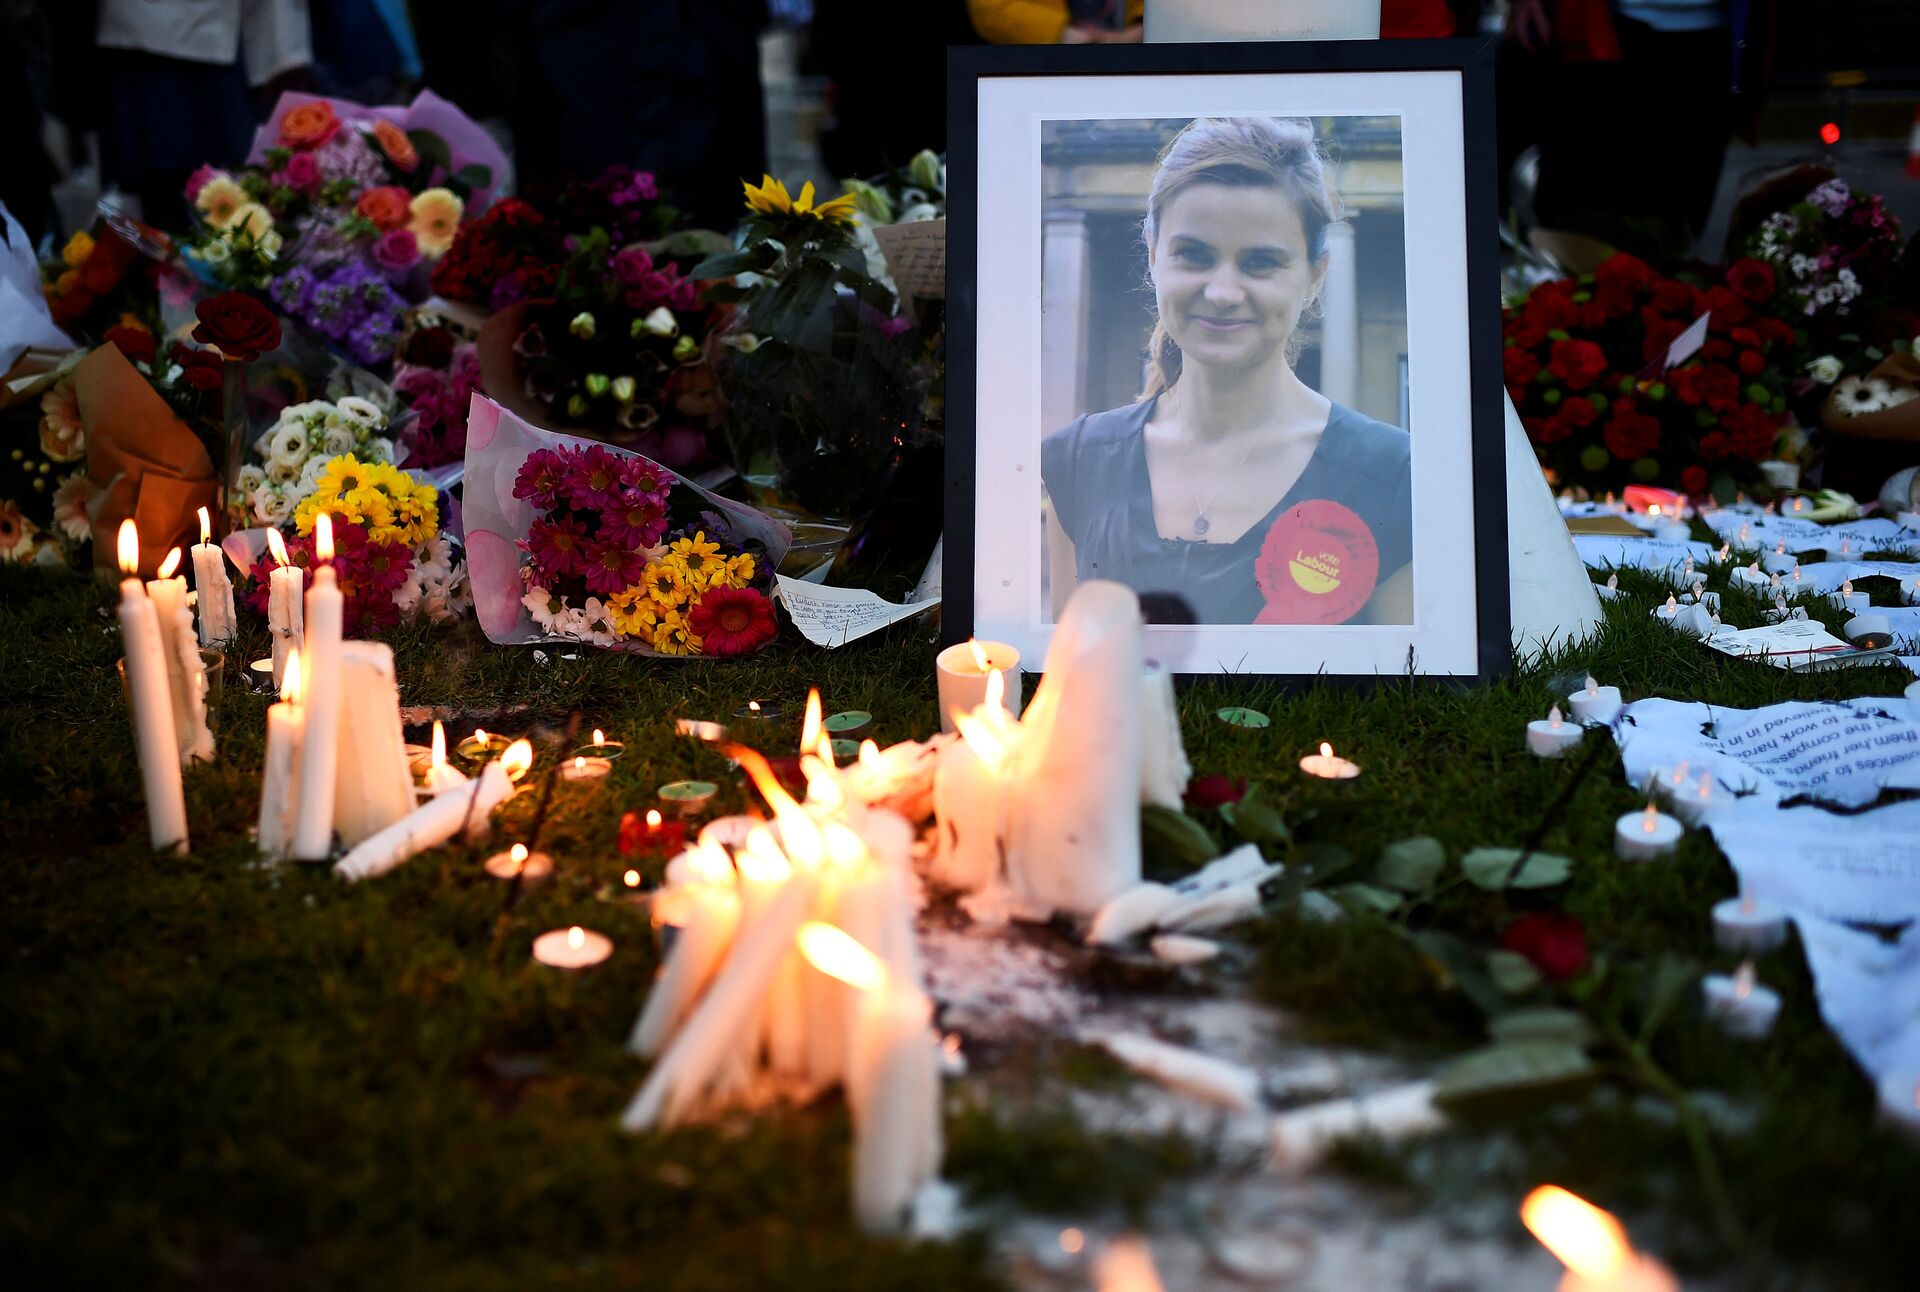 Mourners leave candles in memory of murdered Labour Party MP Jo Cox, who was shot dead in Birstall, during a vigil at Parliament Square in London, Britain June 17, 2016 - Sputnik International, 1920, 16.10.2021